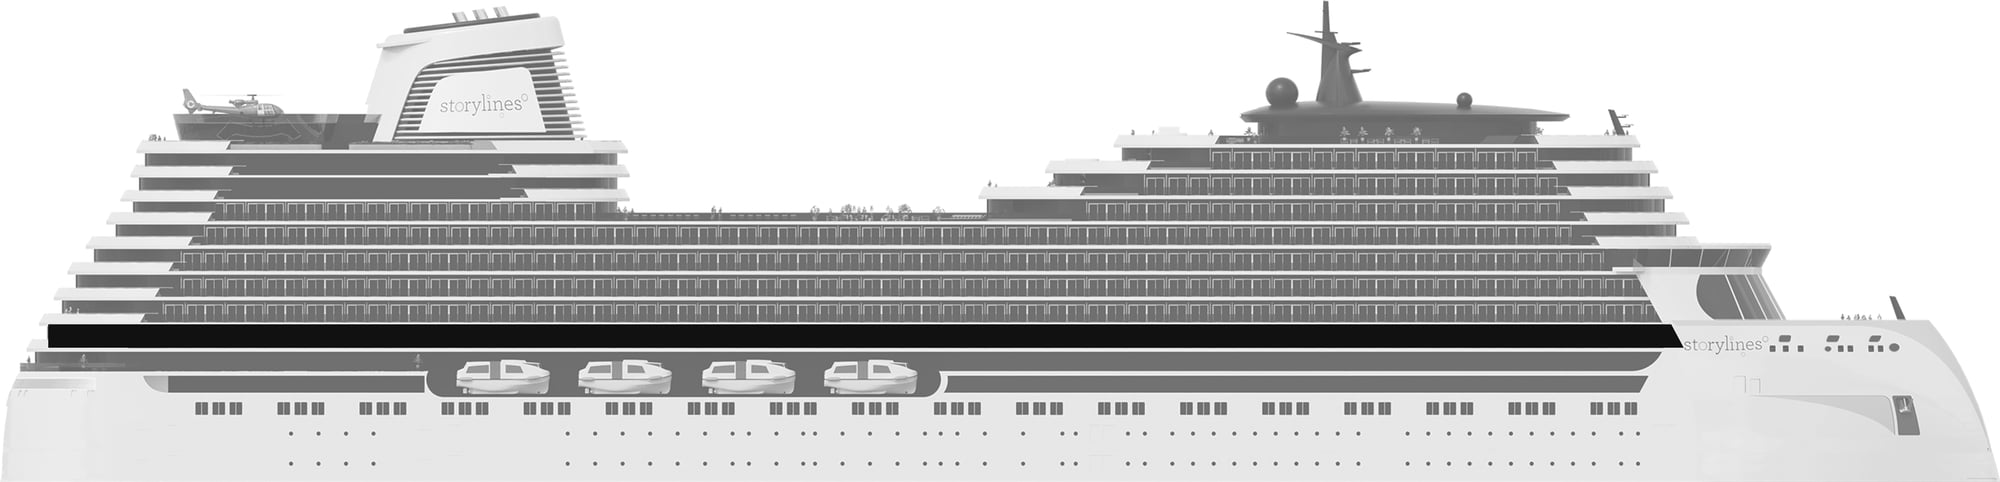 Profile shot of Storylines residential ship showing the location of Deck 9